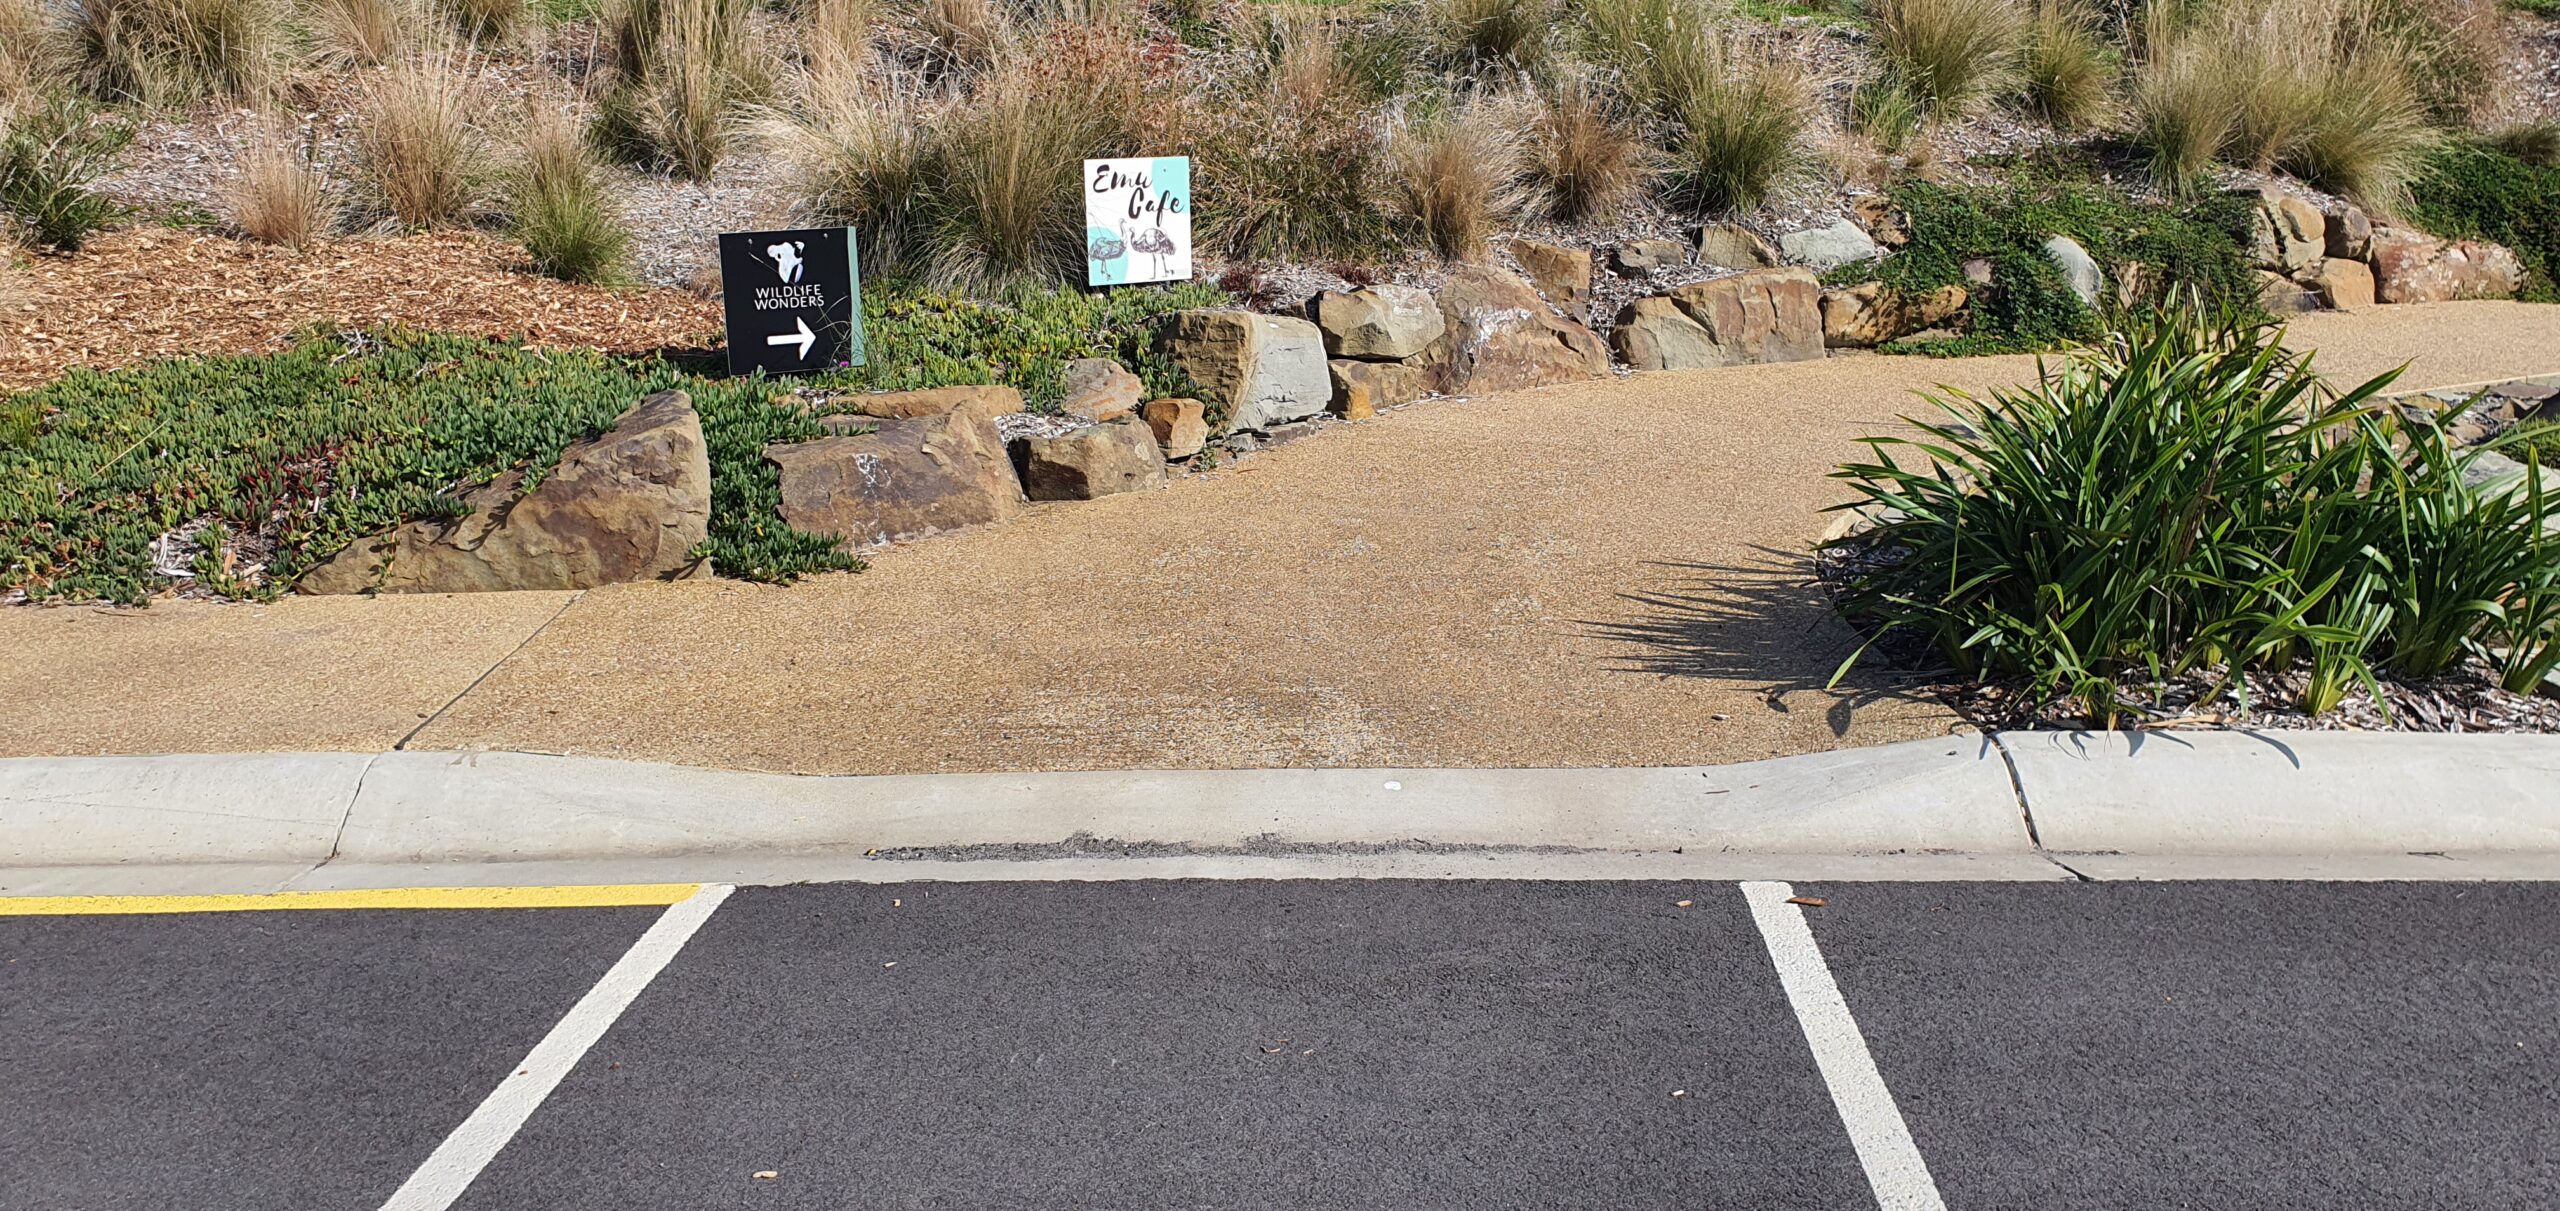 The compacted gravel pedestrian path from the car park to the Wildlife Wonders entrance